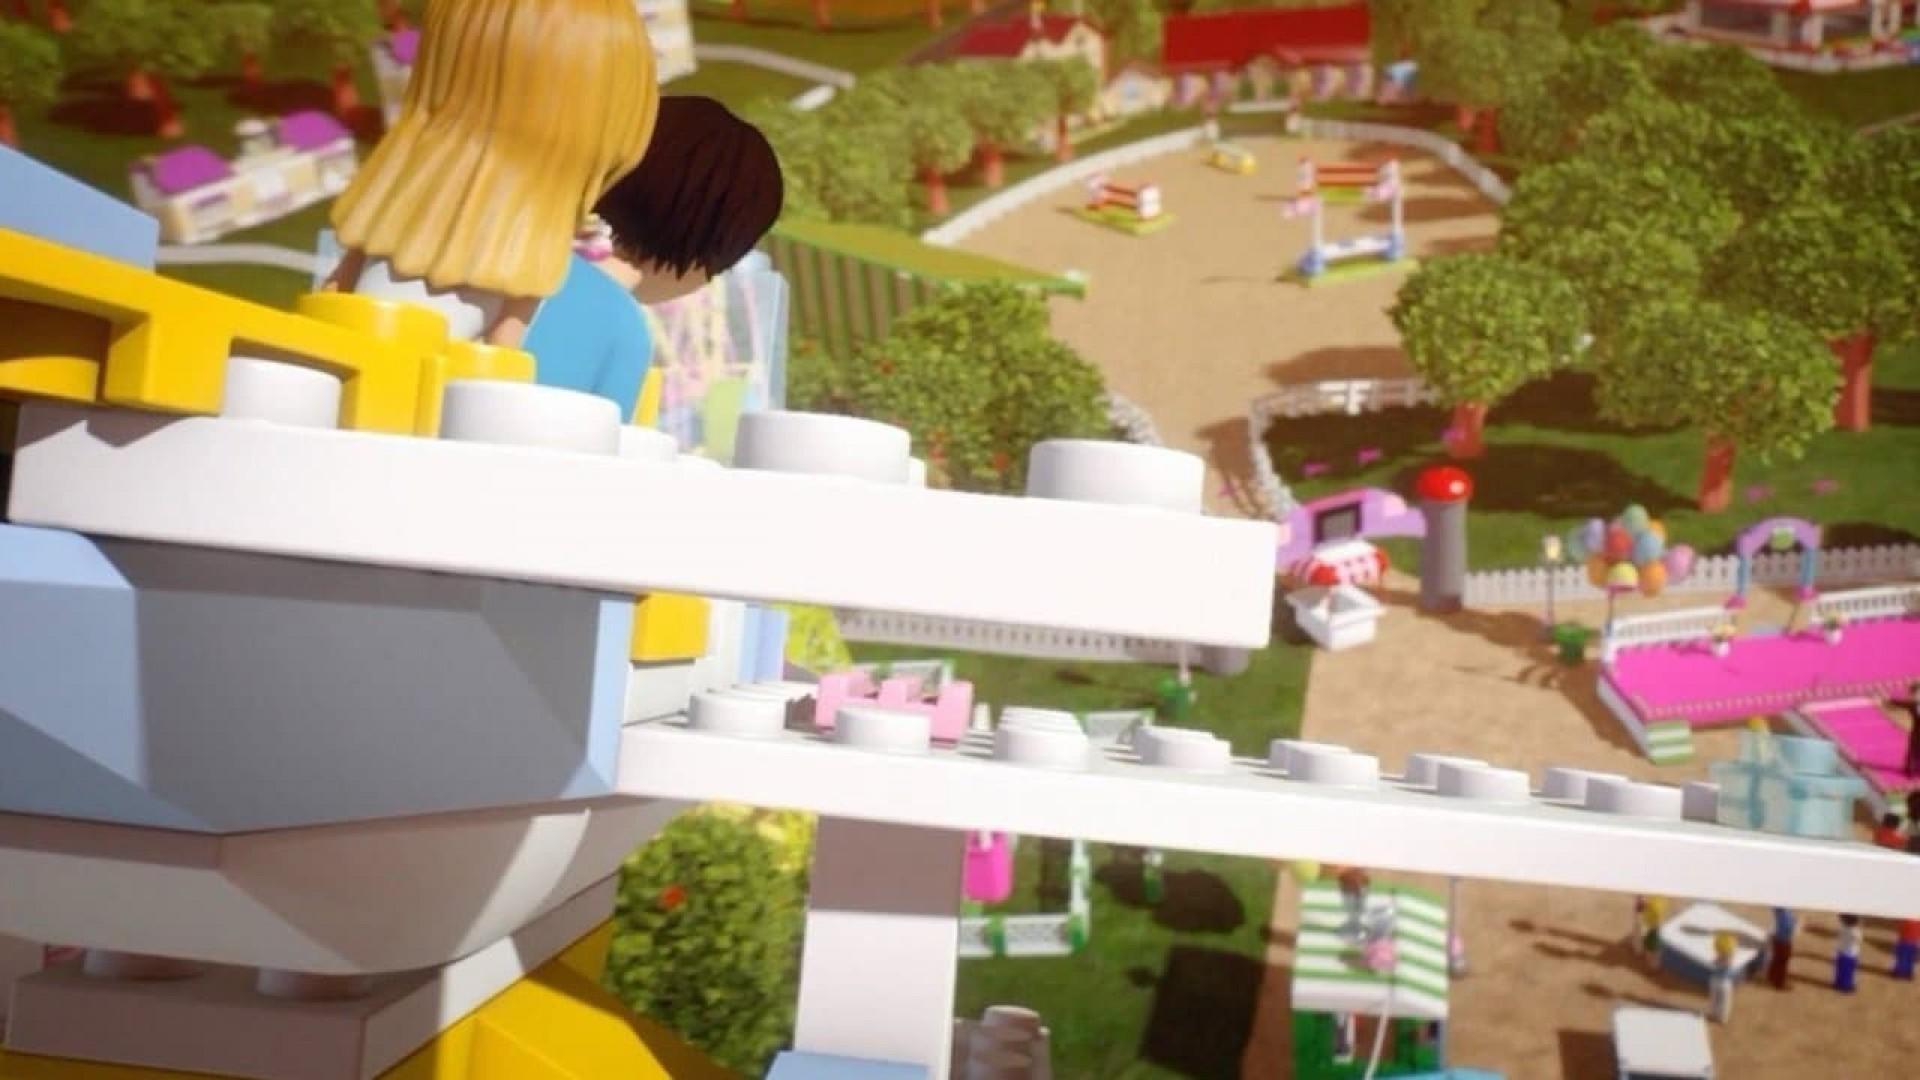 Lego Friends: New Girl In Town